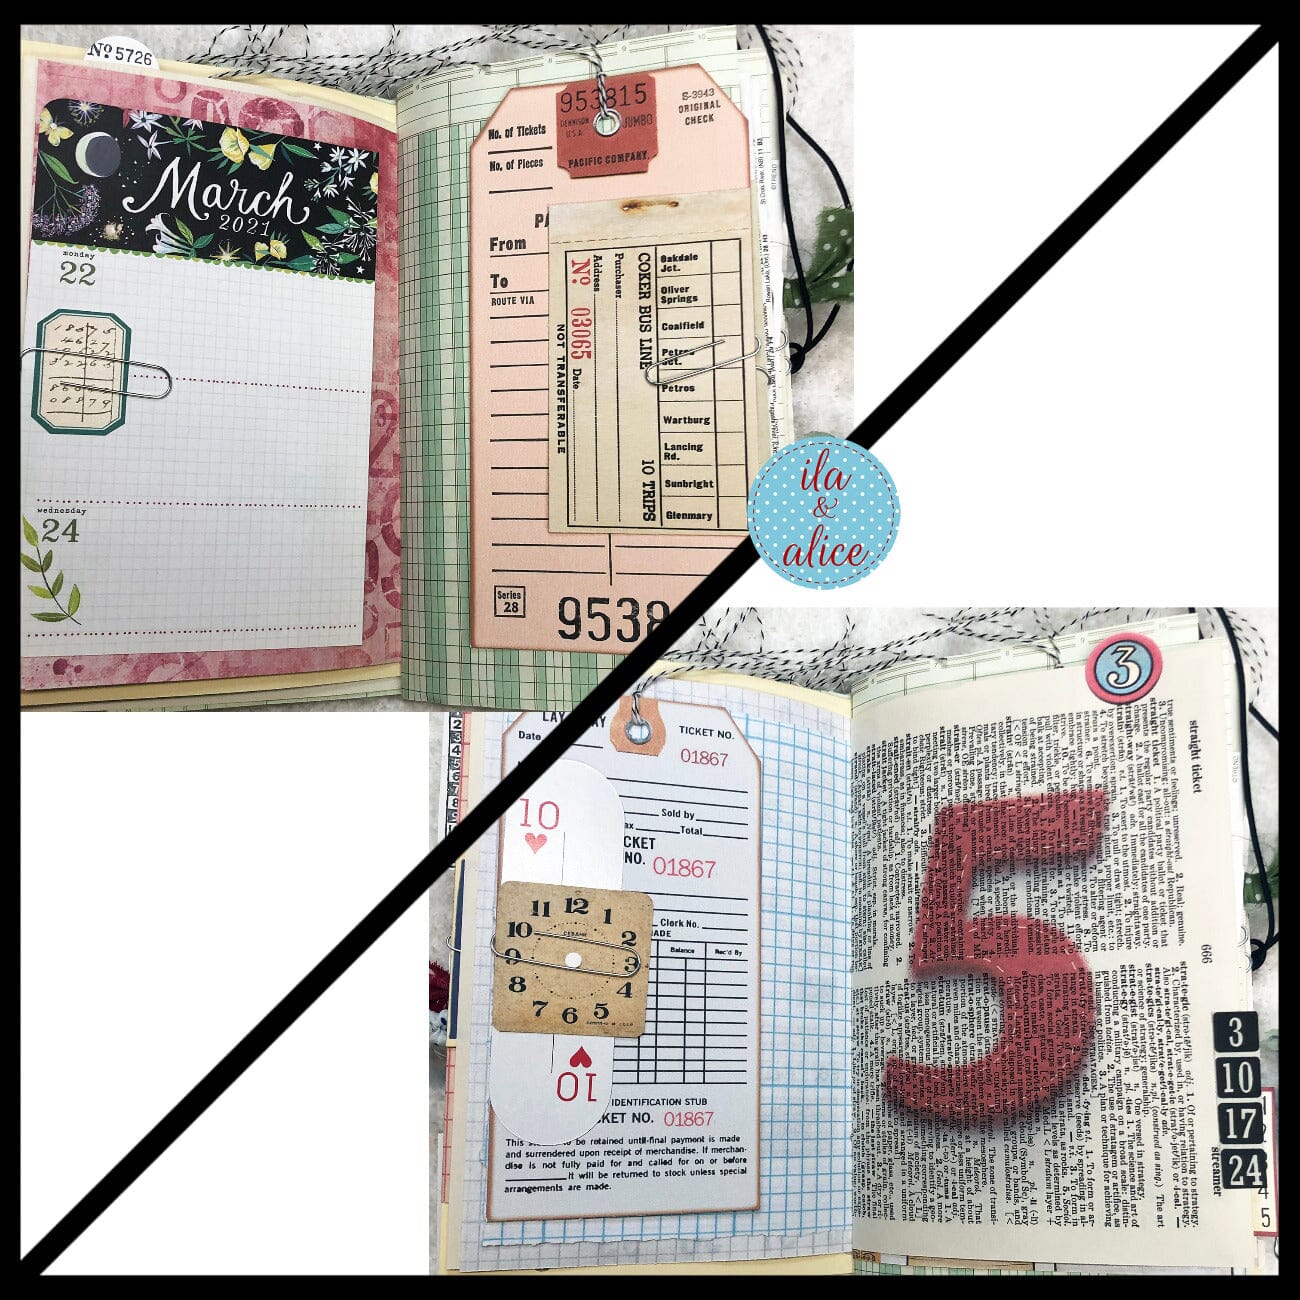 Number Themed Junk Journal with Collage Cover #1 Journal ila & alice 